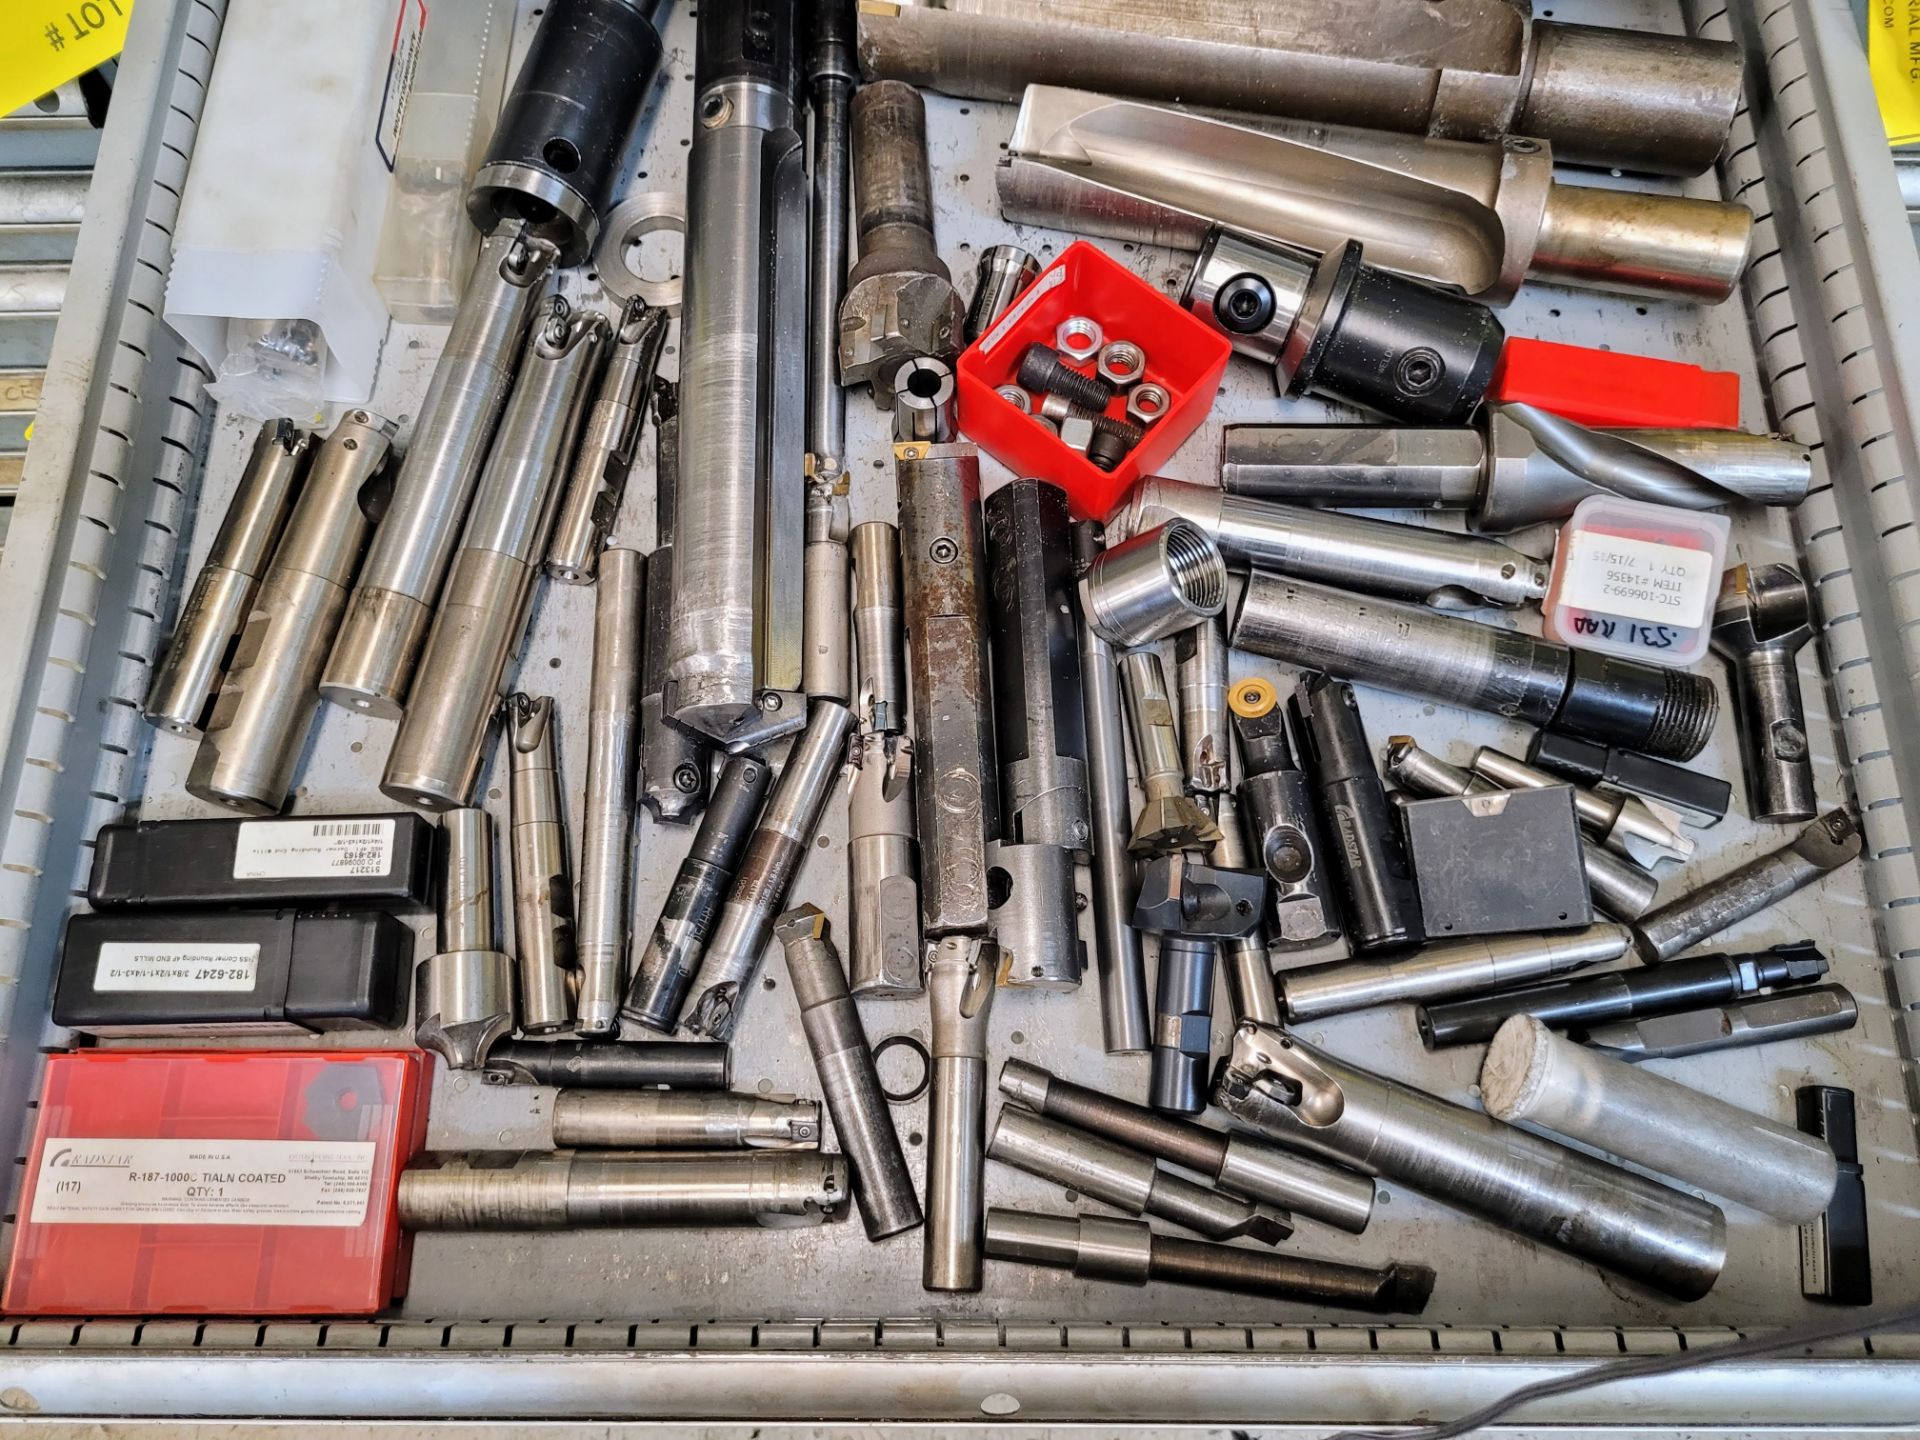 CONTENTS OF (1) TOOL CABINET DRAWER INCLUDING CARBIDE INSERTS, INSERT CUTTING BARS, BORING BARS,